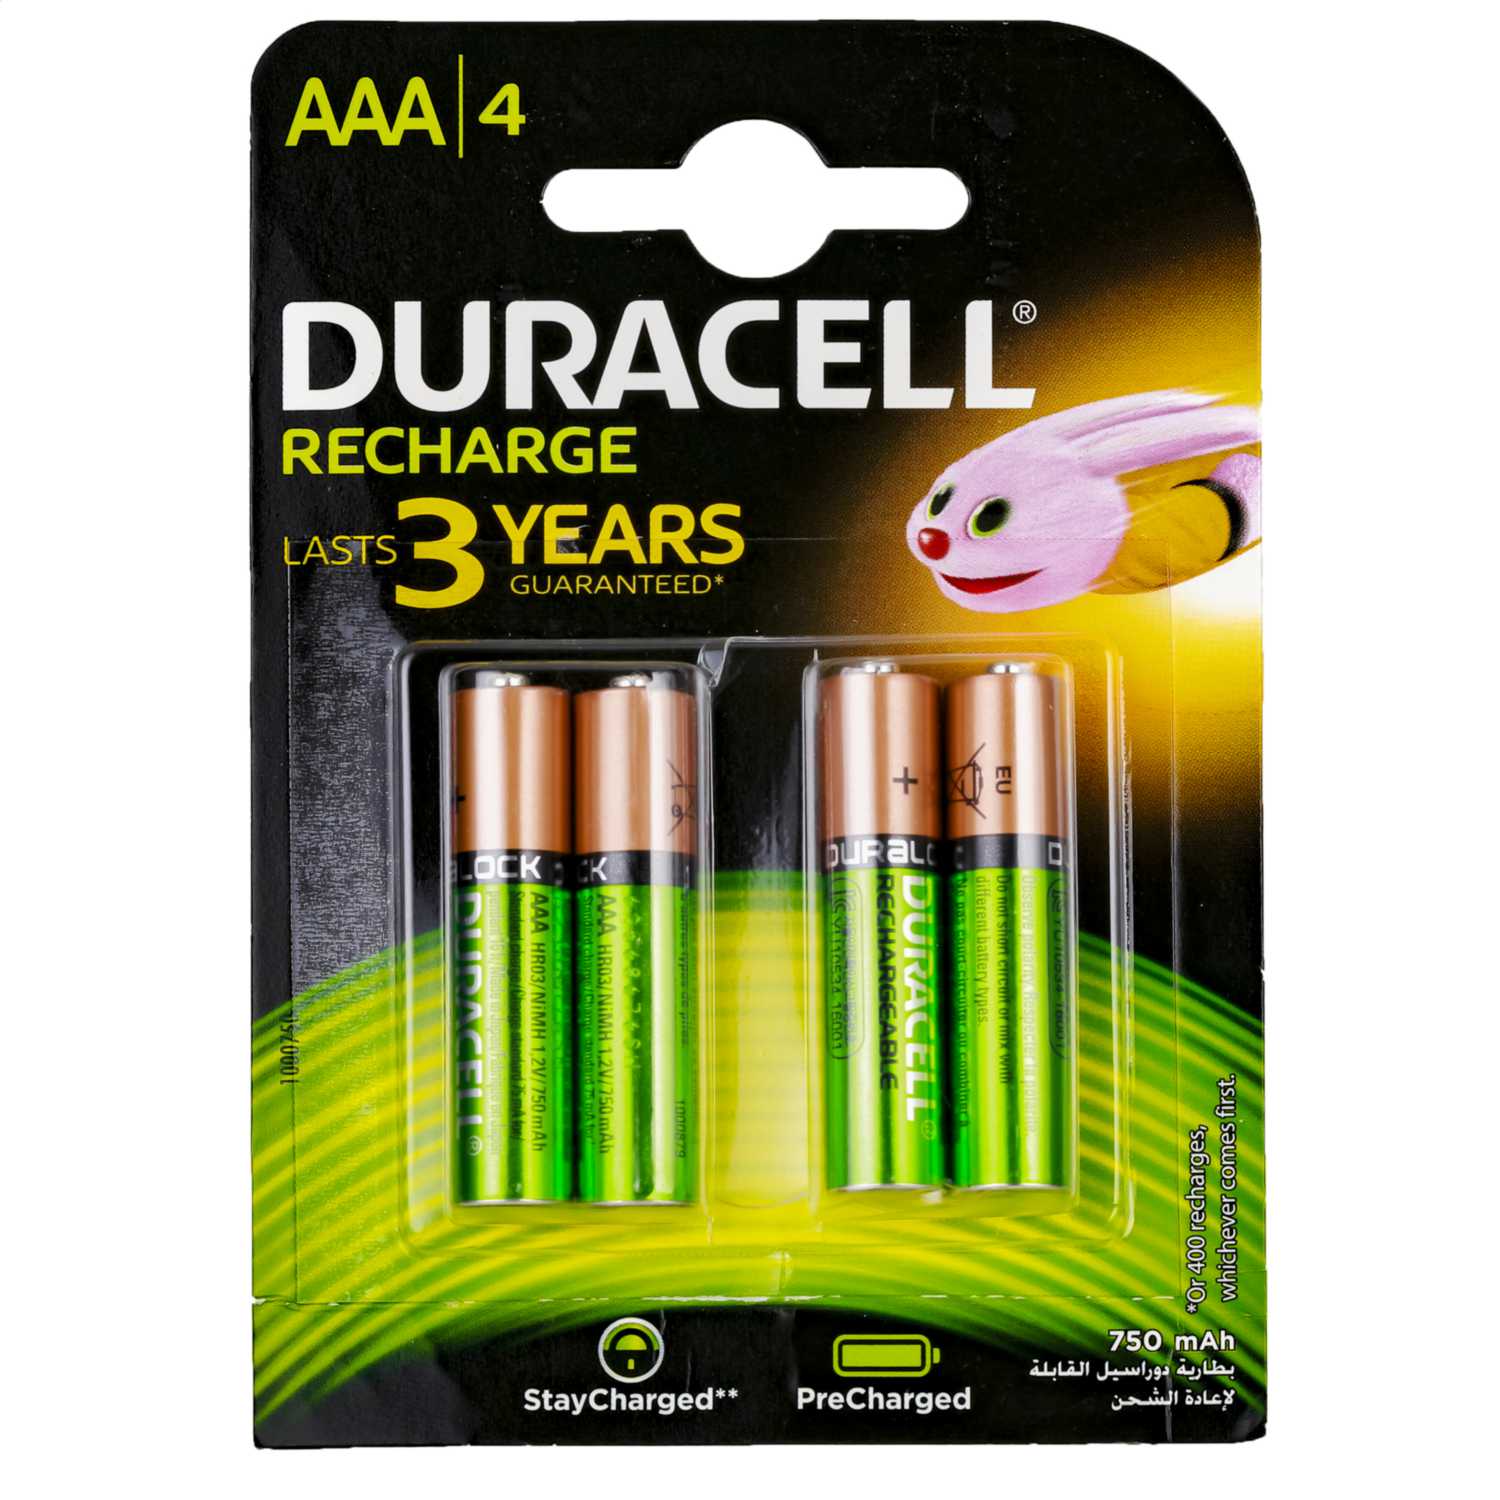 Duracell 12v Aaa Hr3 Rechargeable Battery Pack Of 4 Hr03 Dur Cef